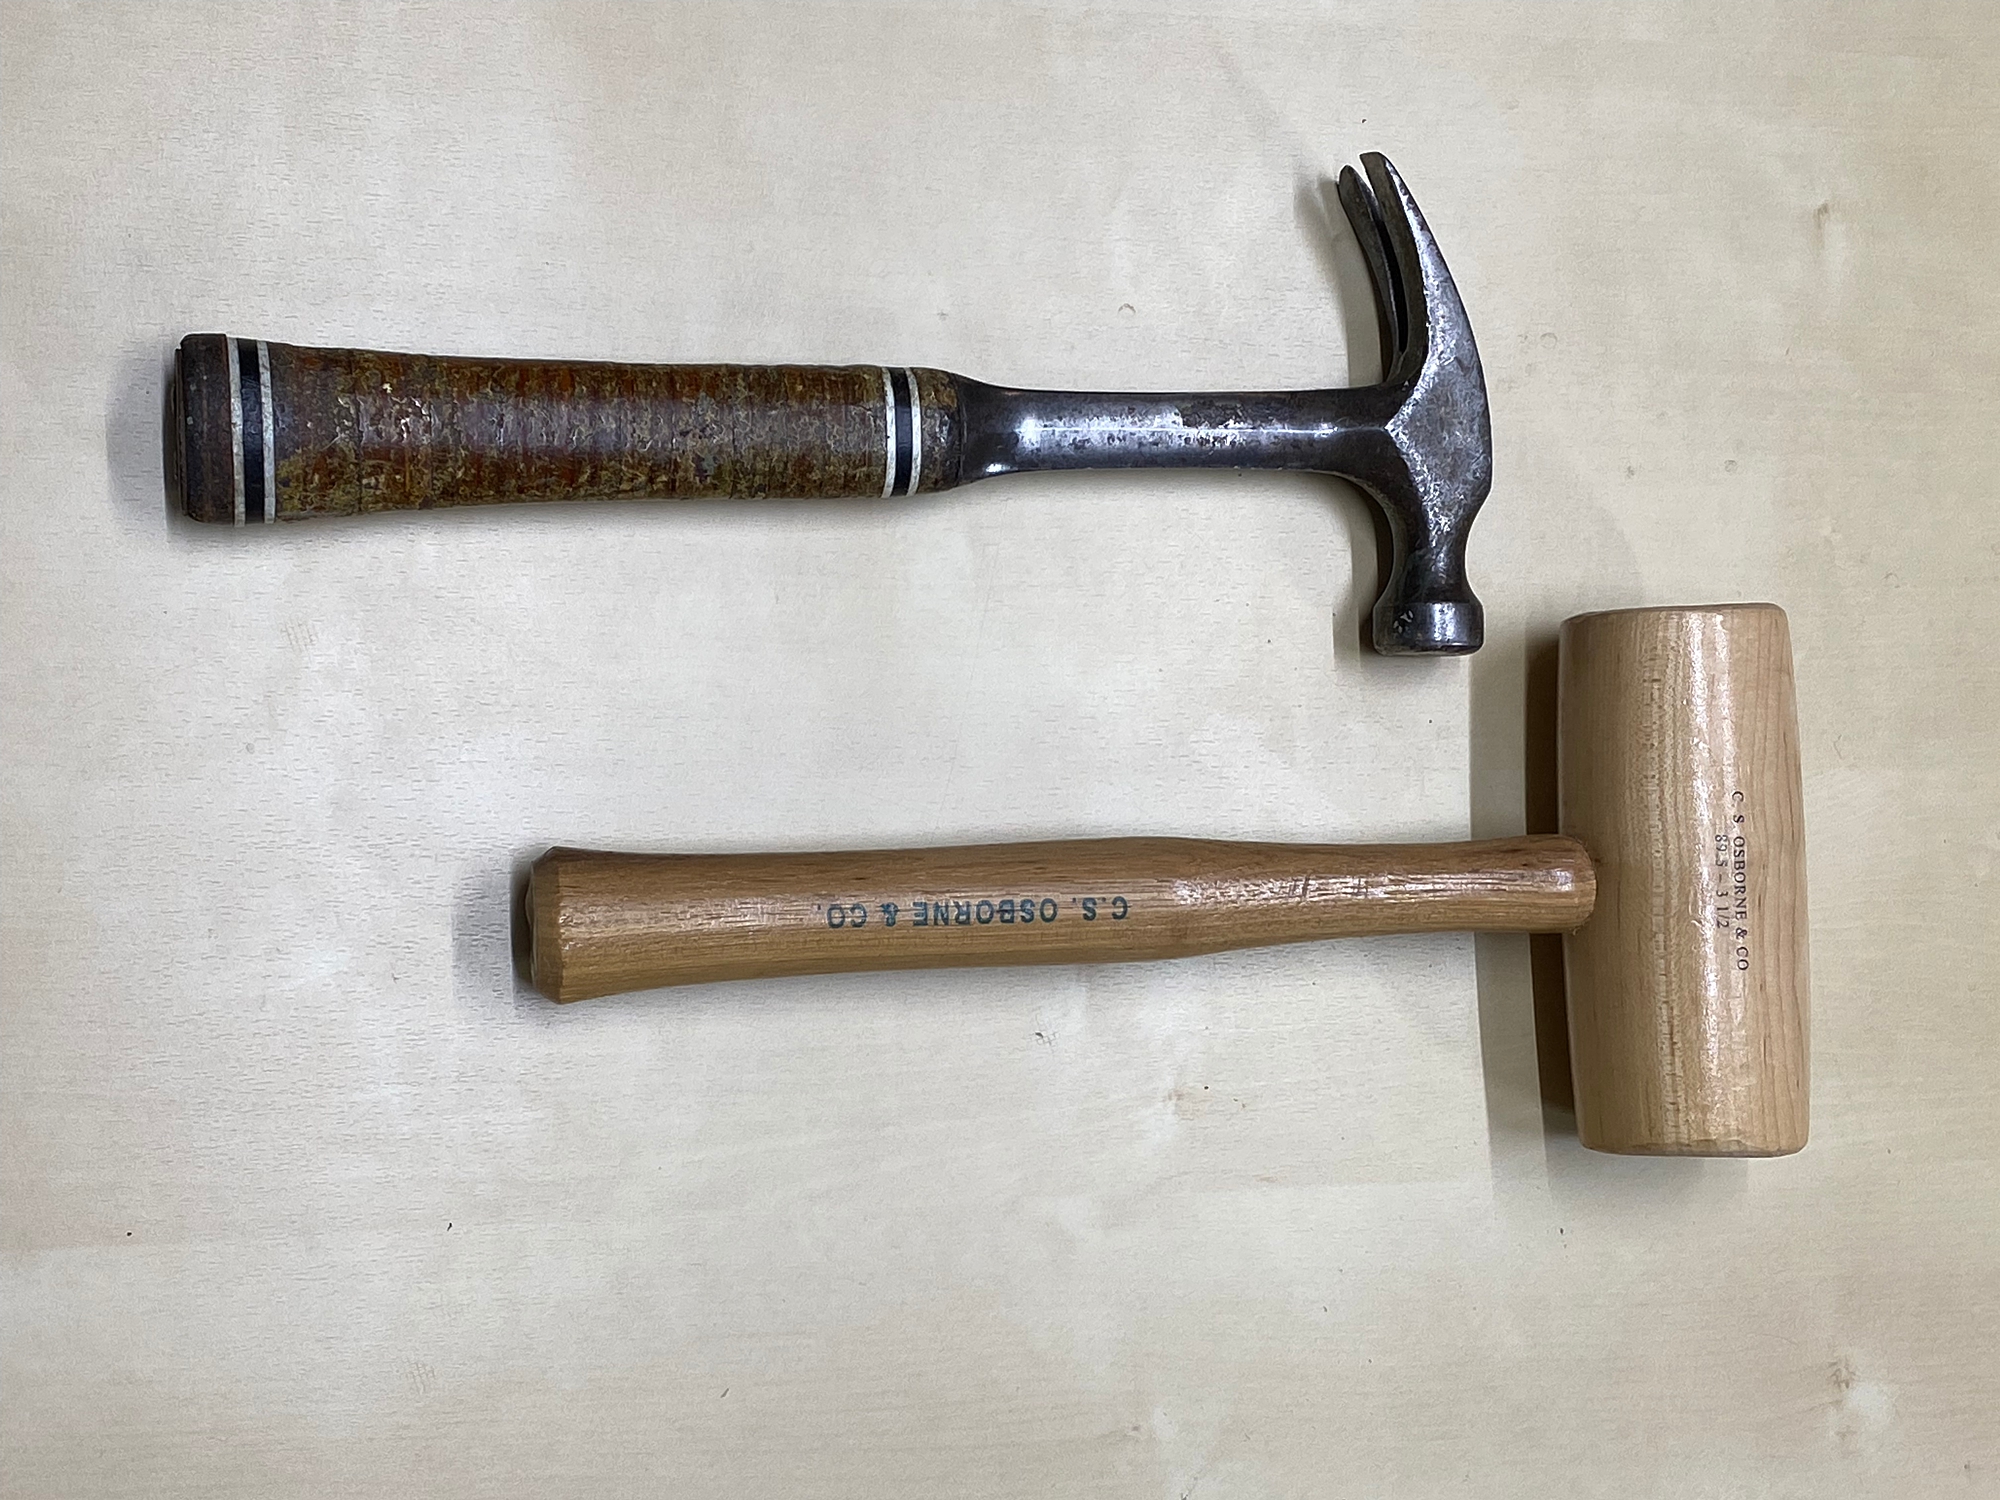 Substitute Tools You Can Use For Upholstery